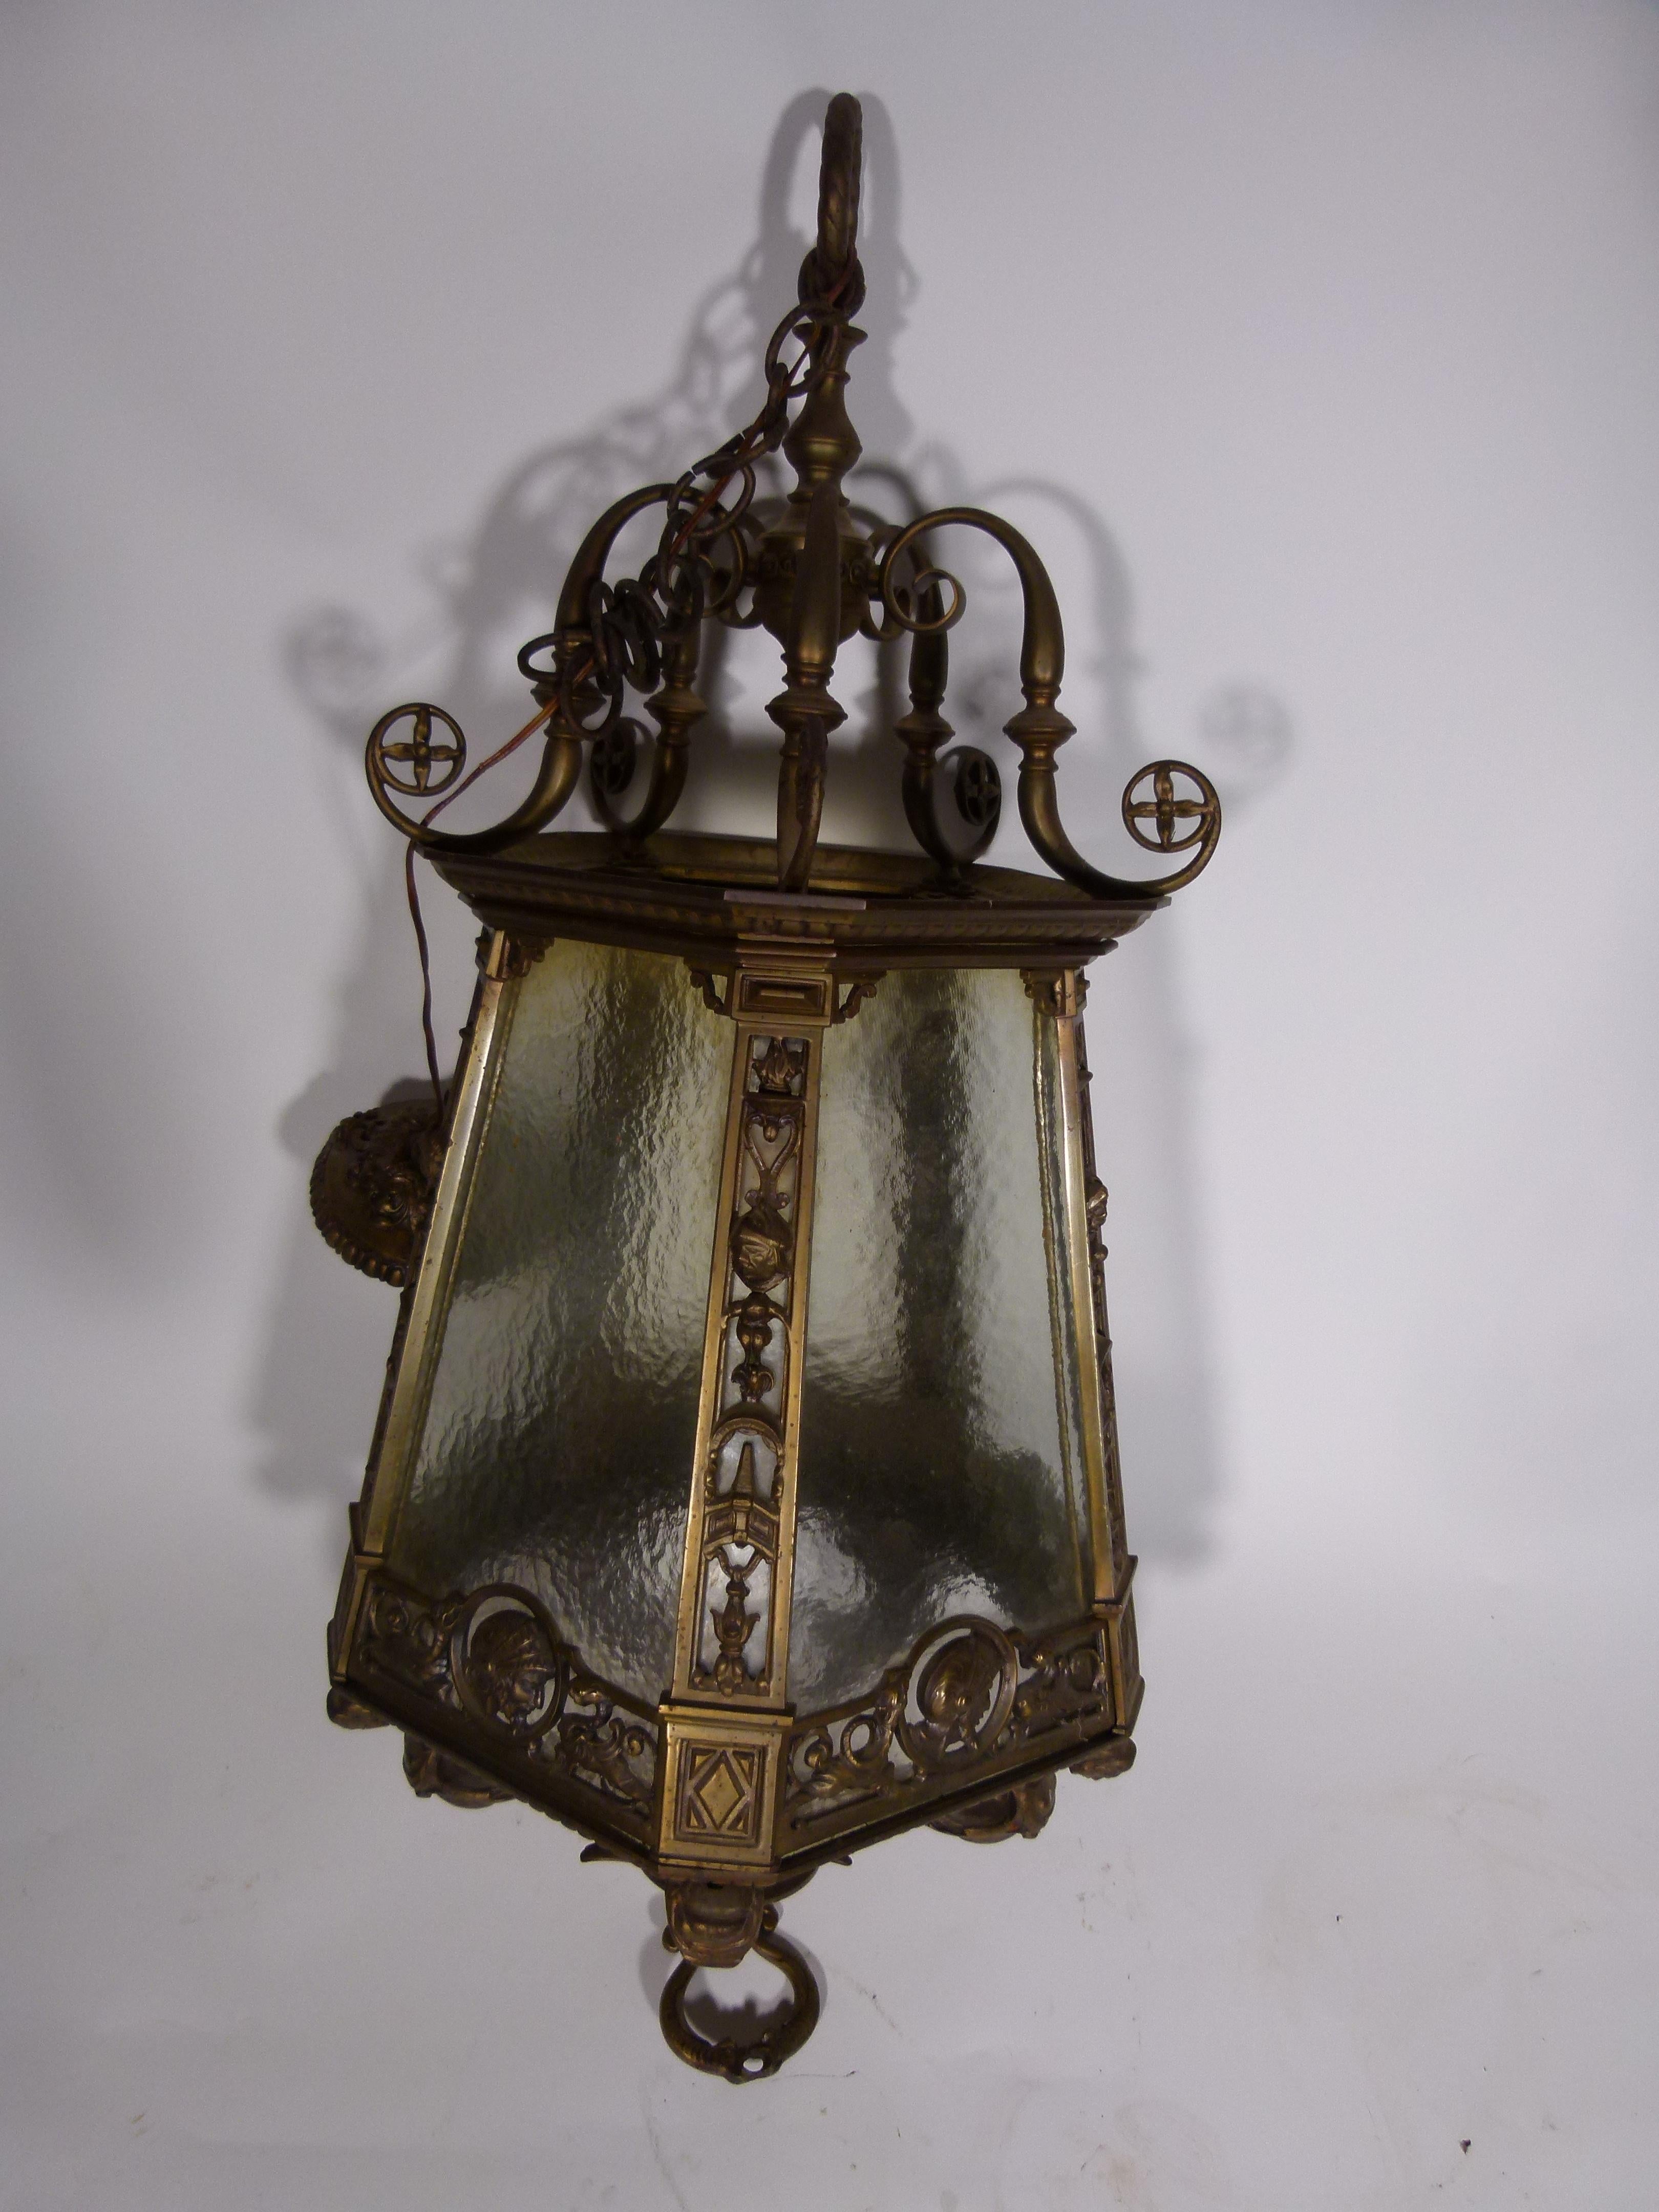 19th century bronze and etched glass pendant lamp from Spain.